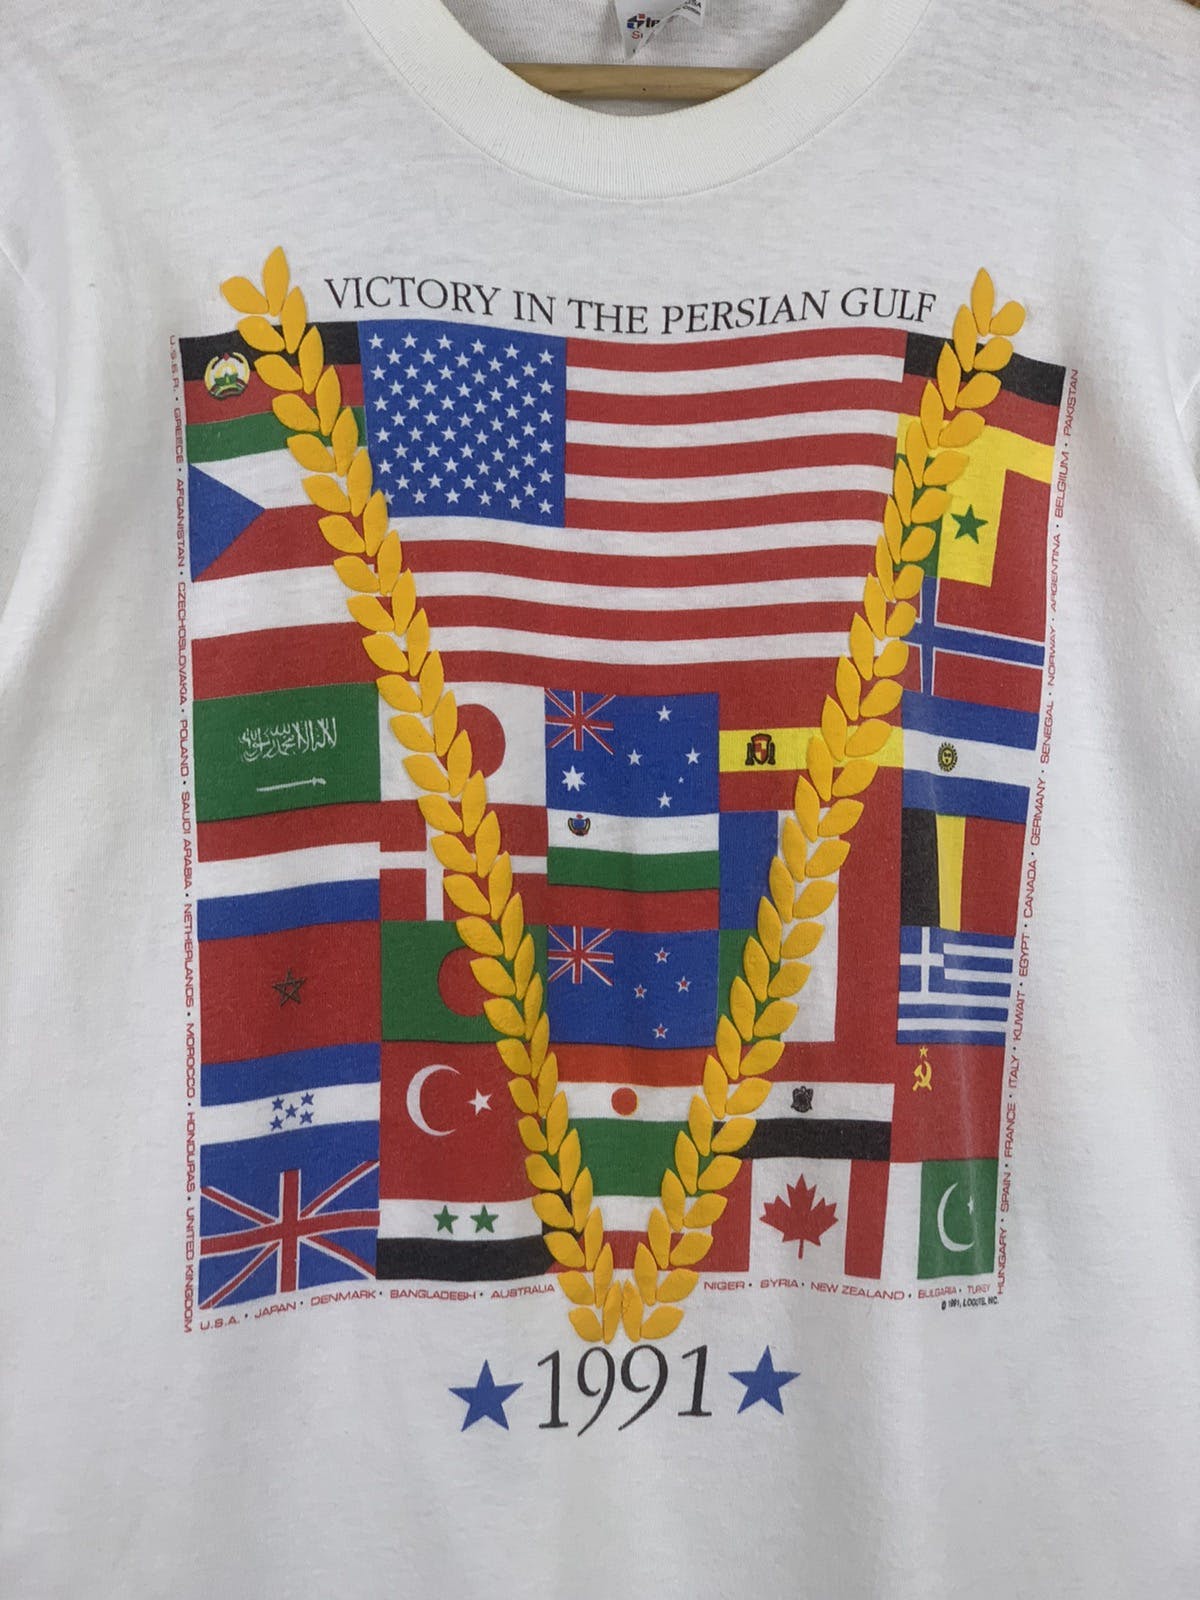 🔥VINTAGE 1991 VICTORY IN THE PERSIAN GULF WHITE T-SHIRT - 8